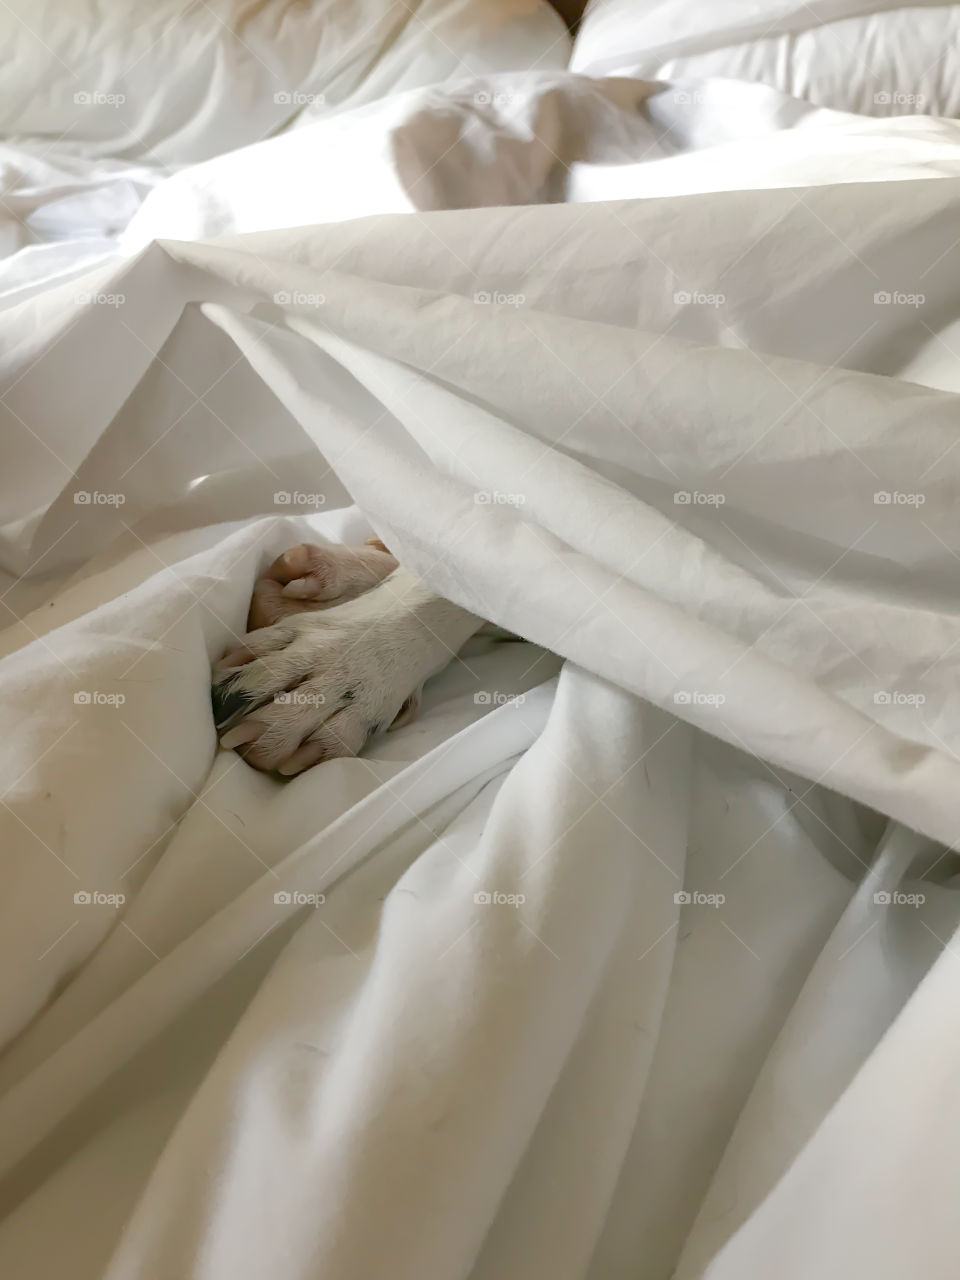 POV, form, texture,colour: My puppy’s mostly white paws are all that’s seen in the messed up white hotel sheets lit with rays of bright sunlight from the window. After all vacation is for pups too! 🐶